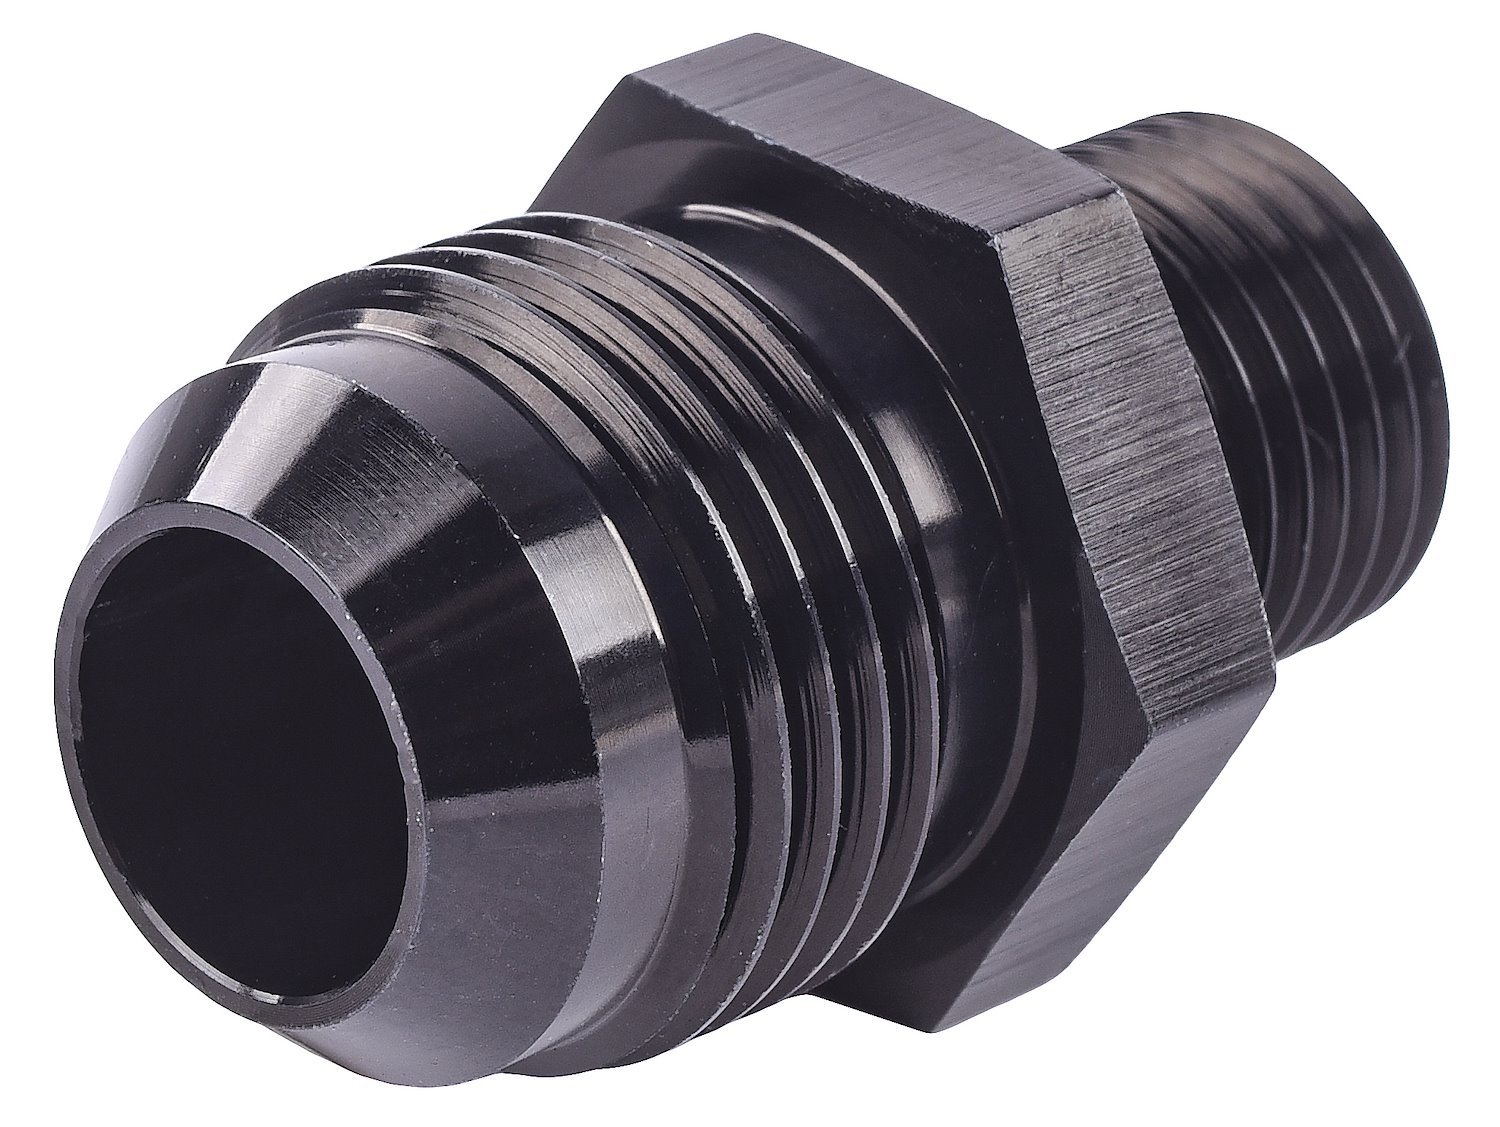 AN to Metric Adapter Fitting [-10 AN Male to 16mm x 1.5 Male]